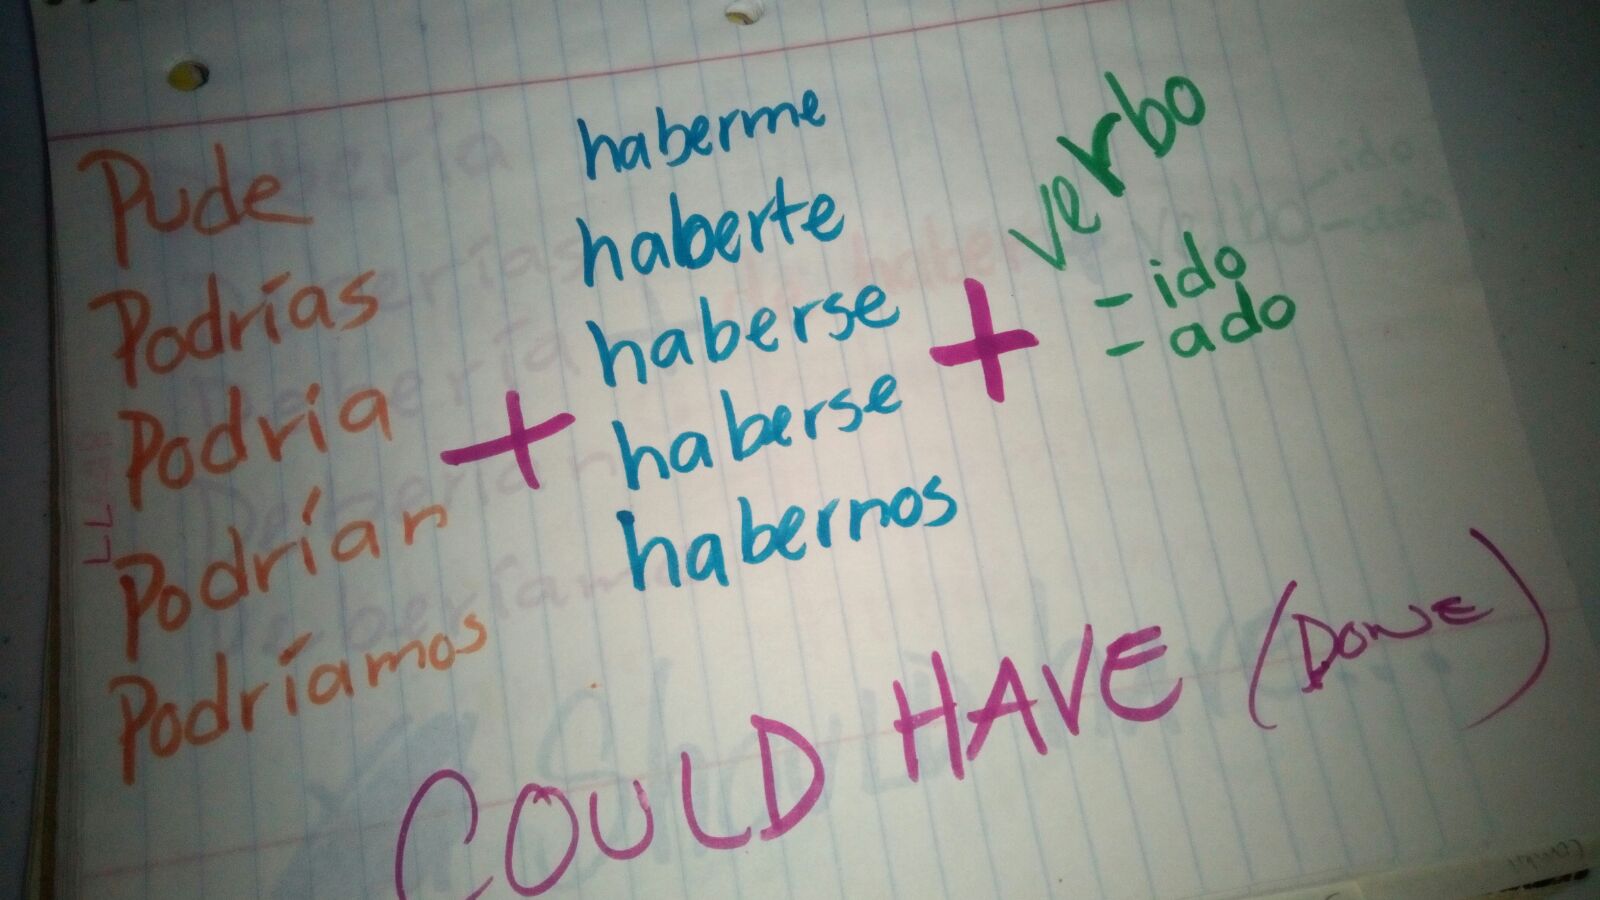 How to say could have in Spanish